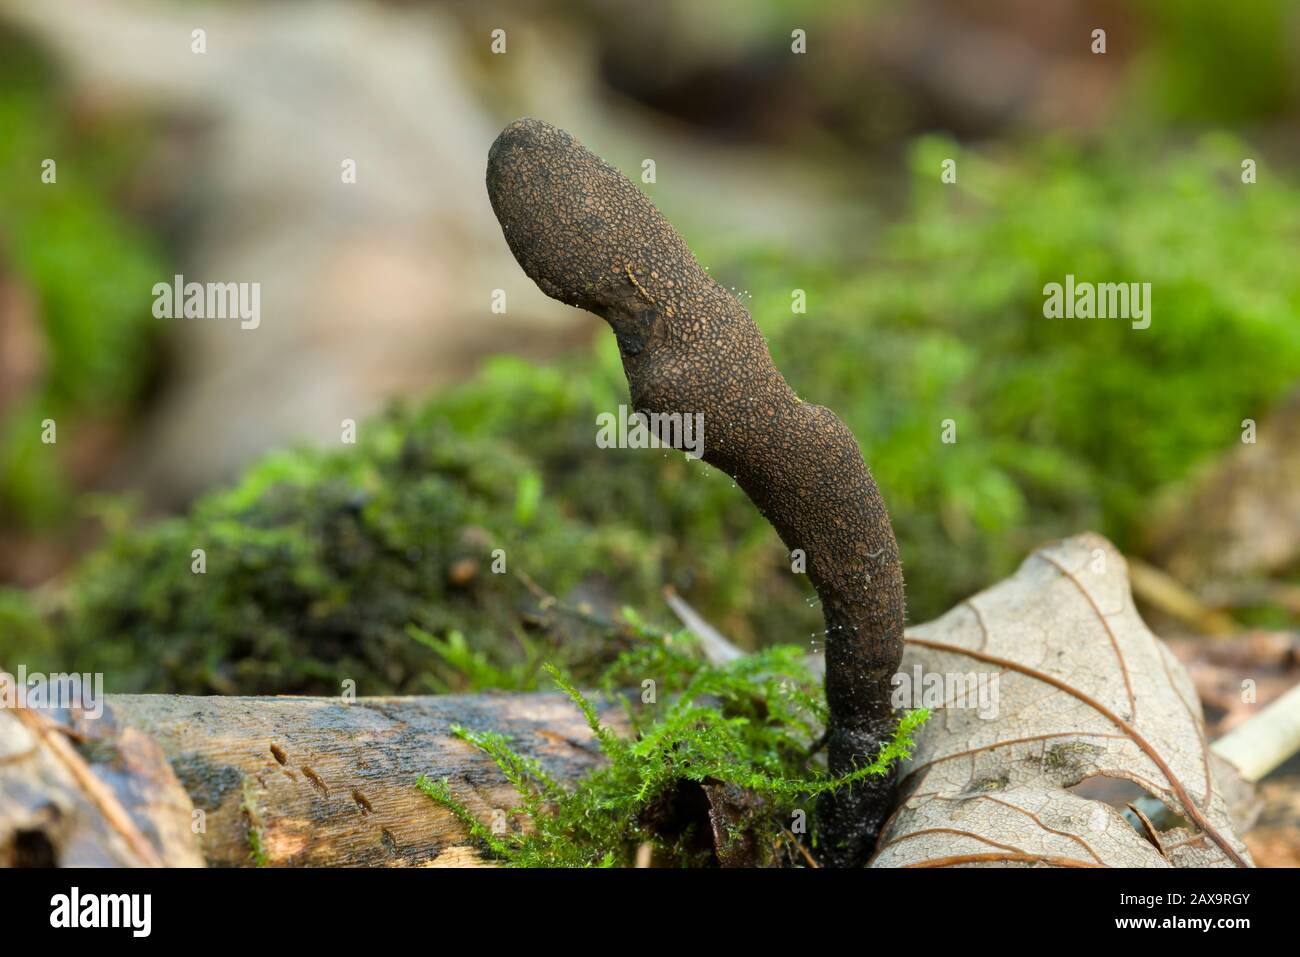 Xylaria longipes fungus commonly known as dead moll's fingers growing on a branch in leaf litter on a woodland floor. Stock Photo